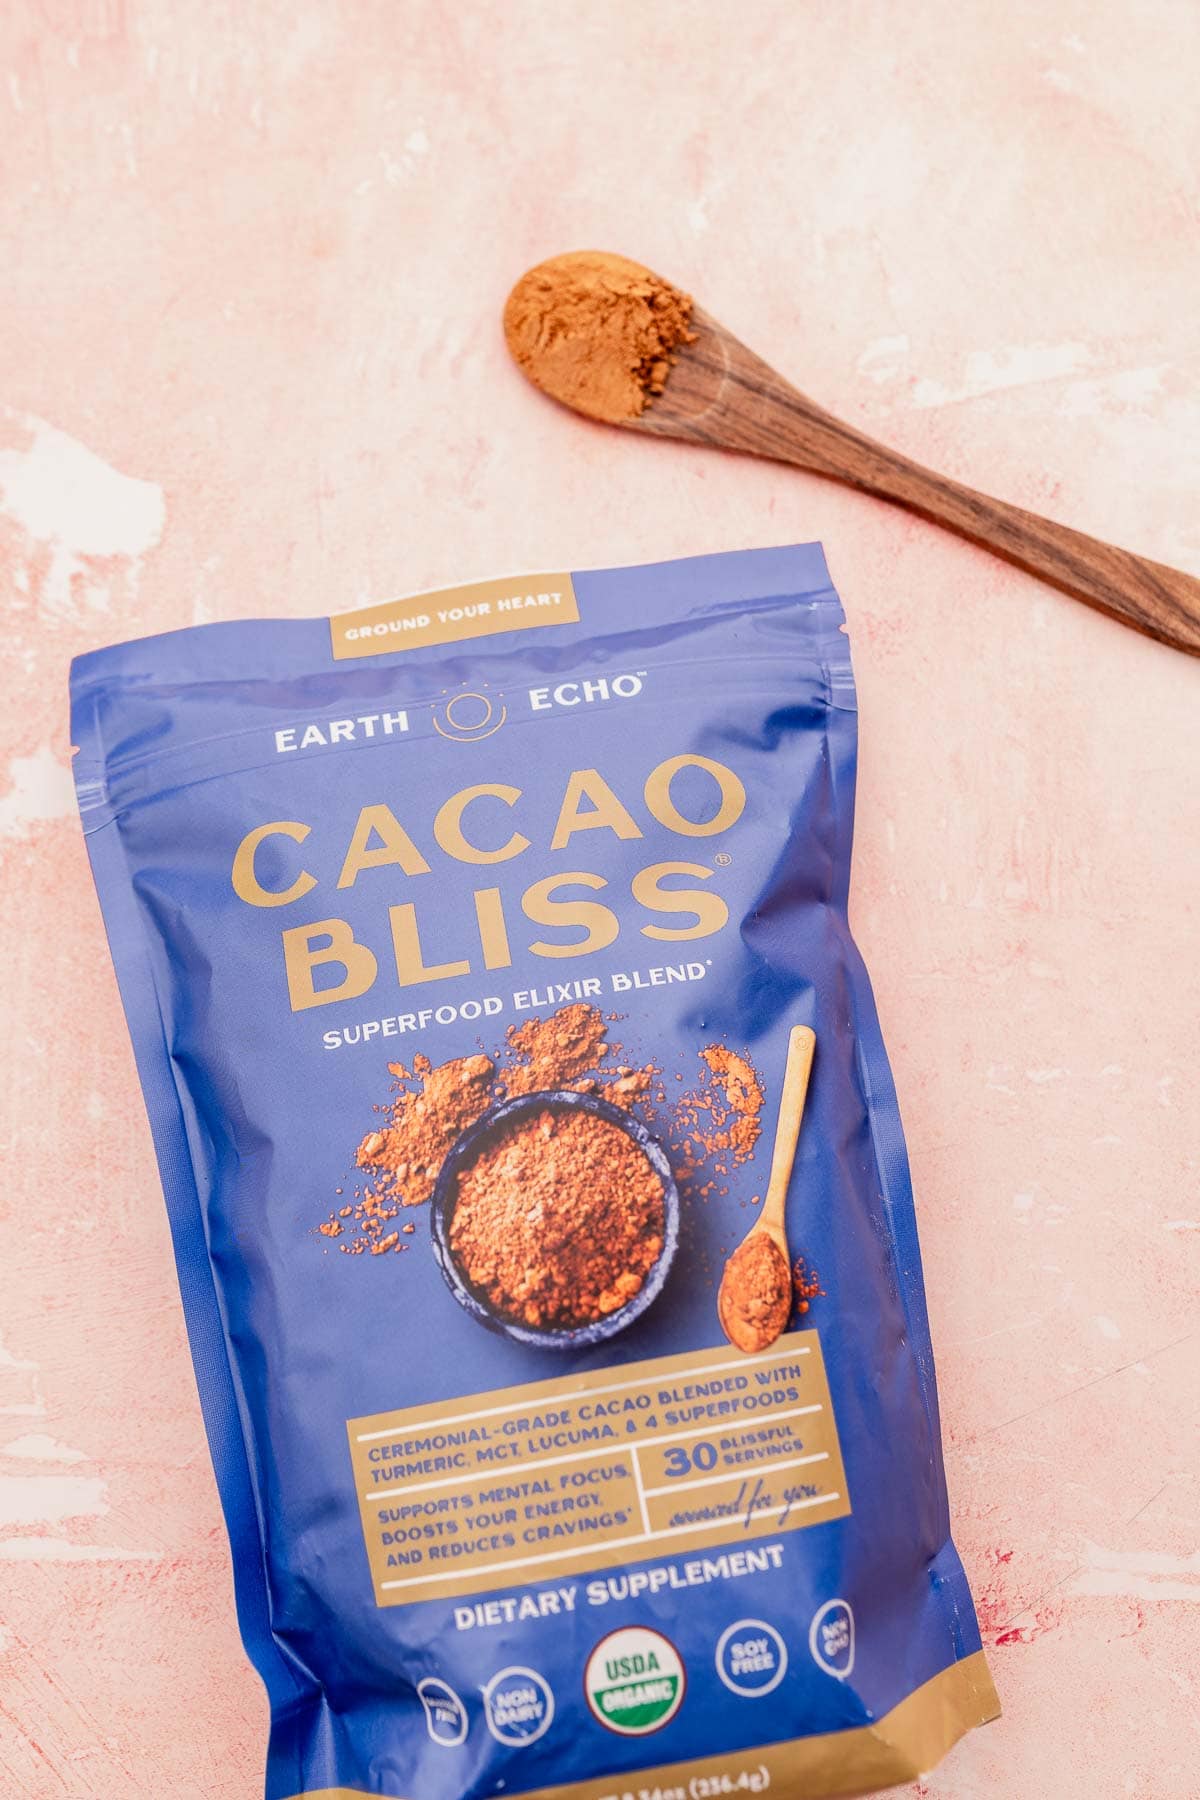 A bag of earth echo cacao bliss superfood elixir blend on a pink surface with a wooden spoon of quinoa crunch bites next to it.